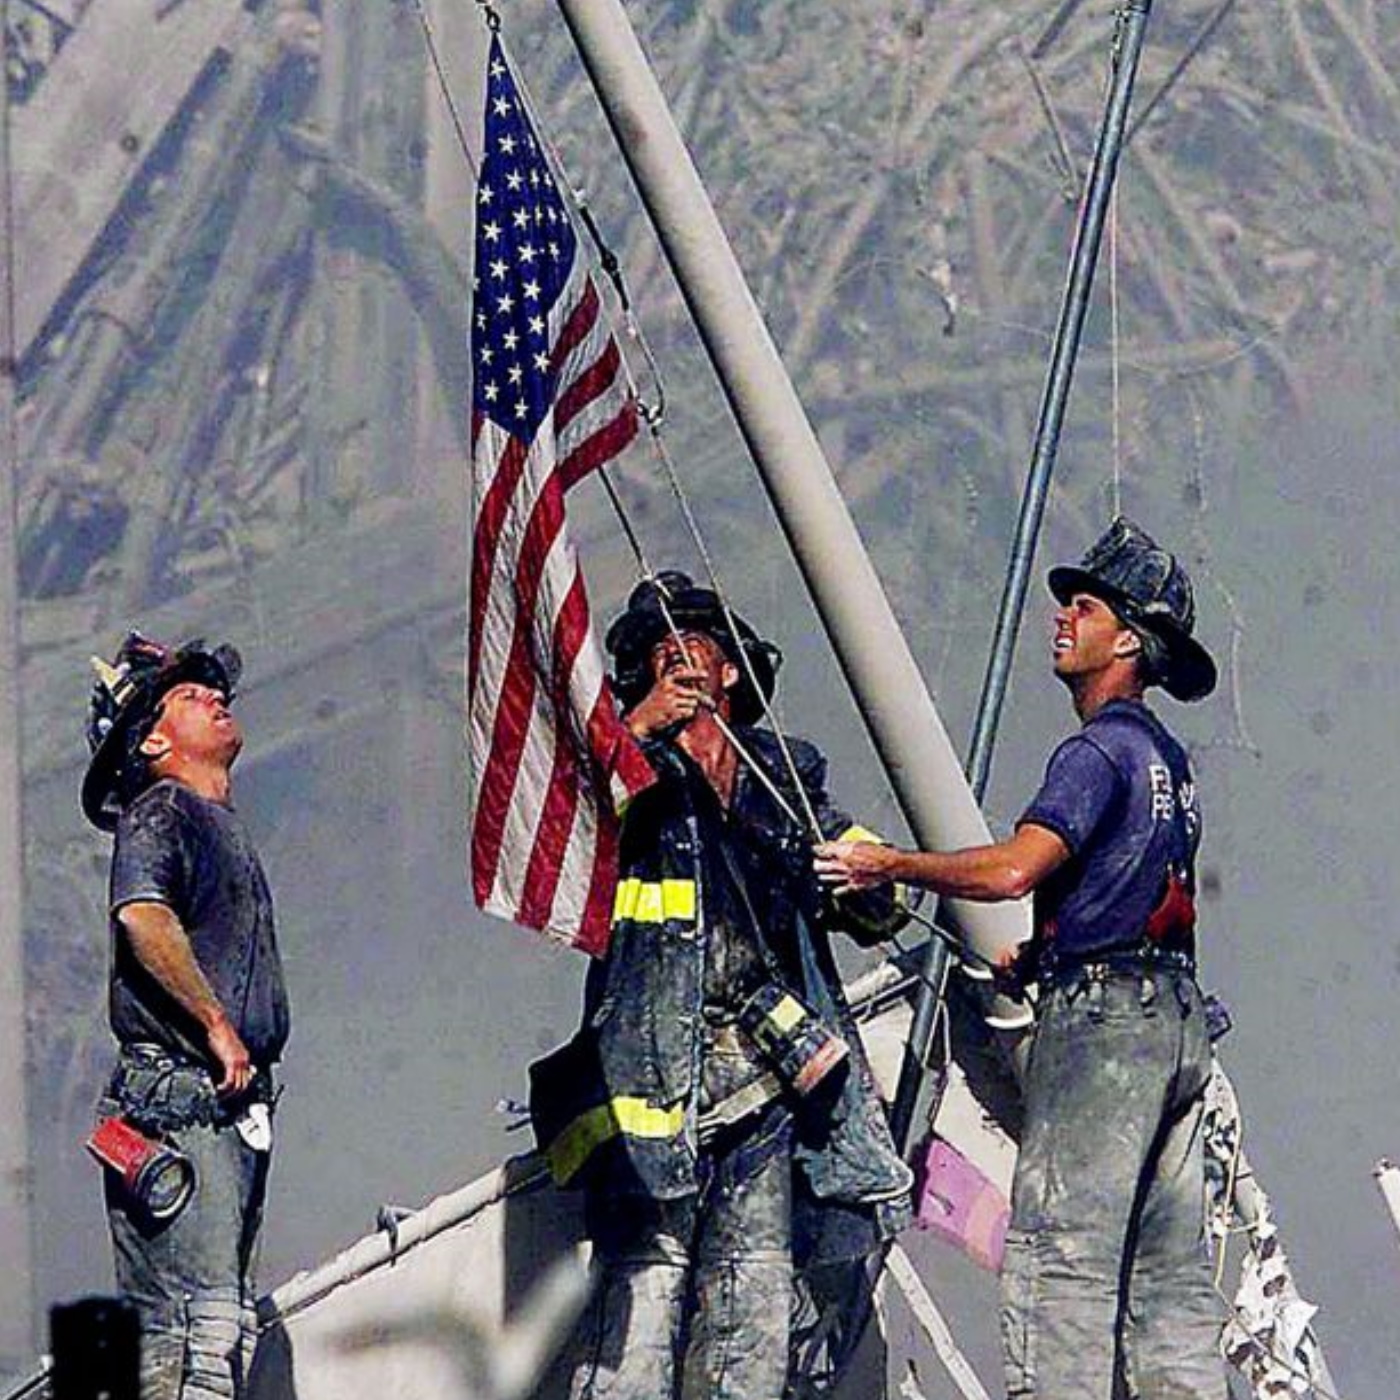 Reflections on Sept. 11, 2001 with Rick Lasky